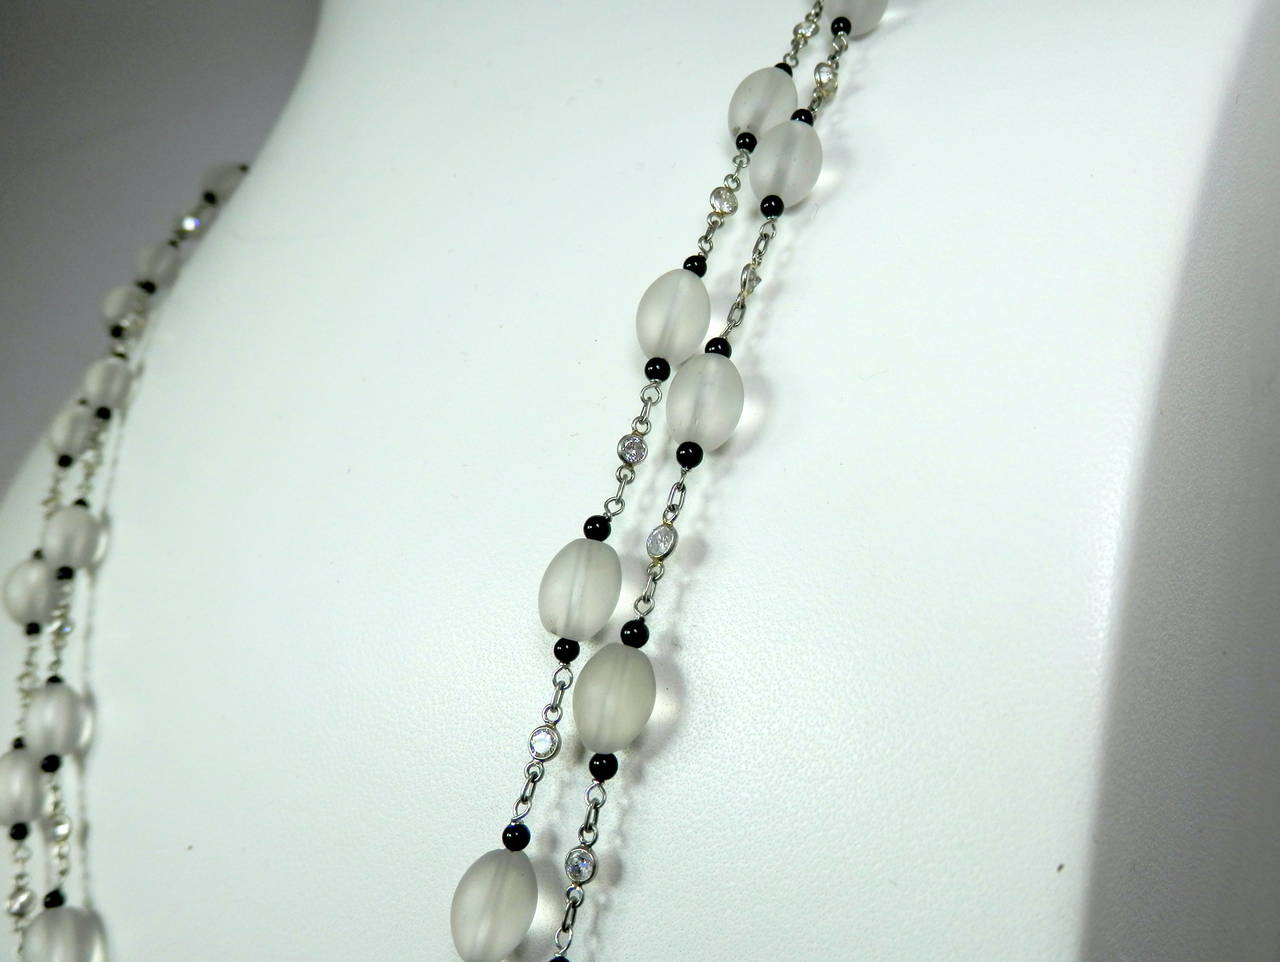 Small onyx beads are interspersed on either side on the rock crystal and these are separated by small full cut diamond brilliants spectacle set.  This chain can be worn long, double or tripled. 66 inches long